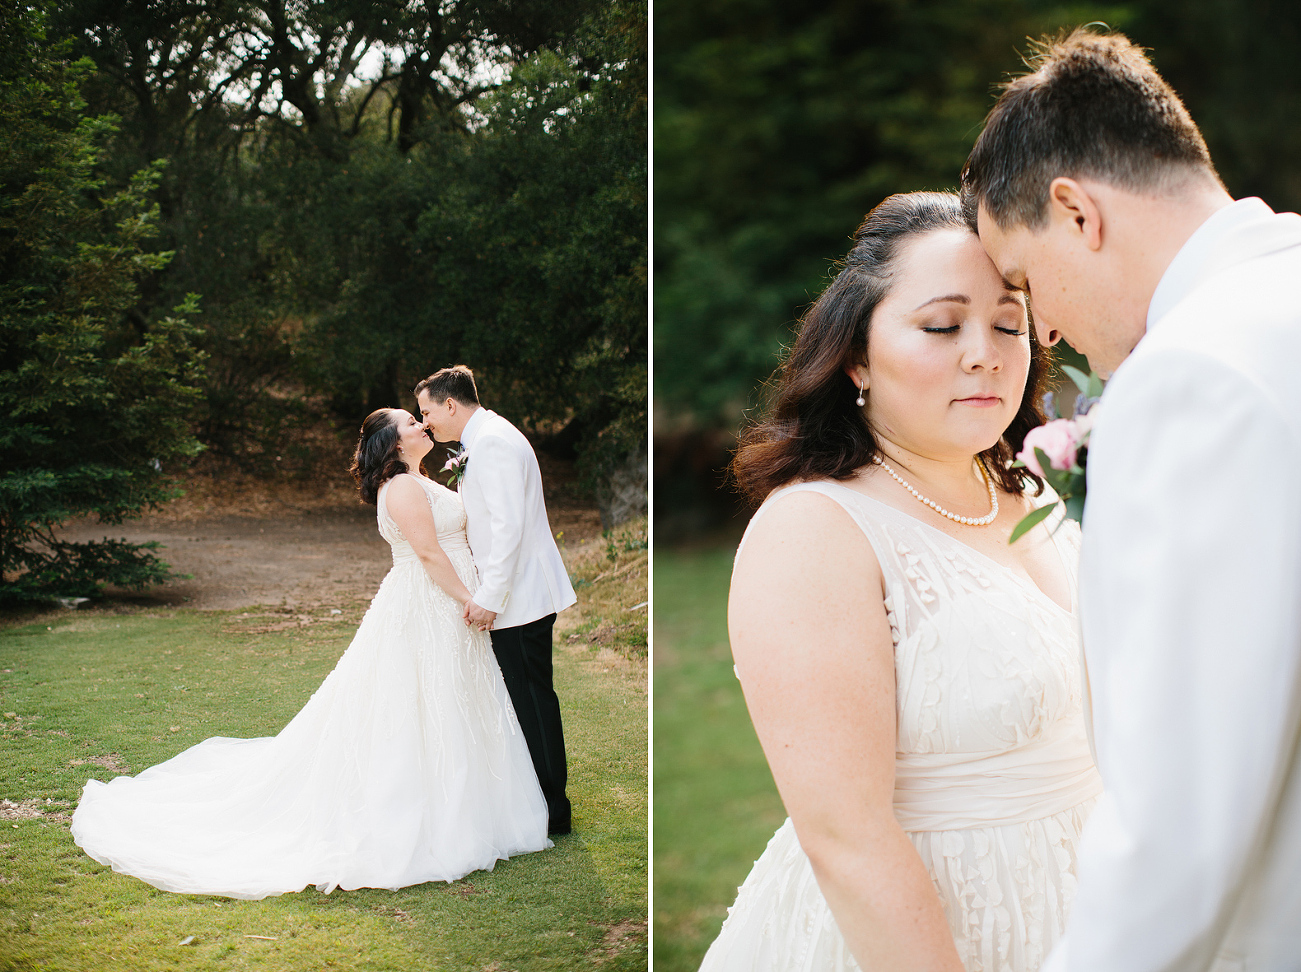 Sweet photos of the bride and groom. 